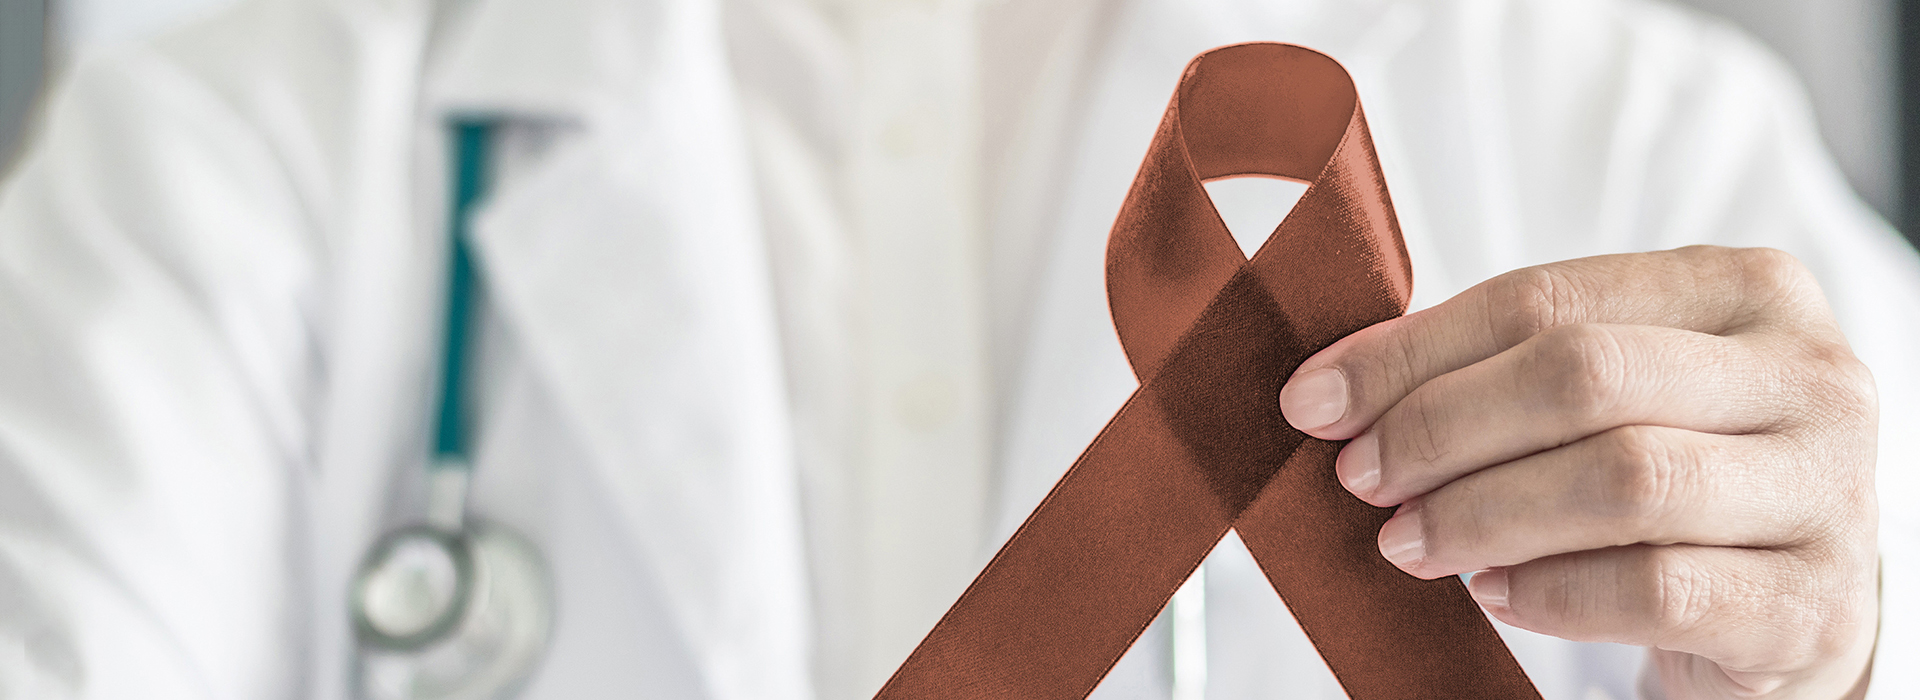 The image shows a person in a medical uniform holding up a red ribbon with a white stripe, symbolizing awareness for a health condition.